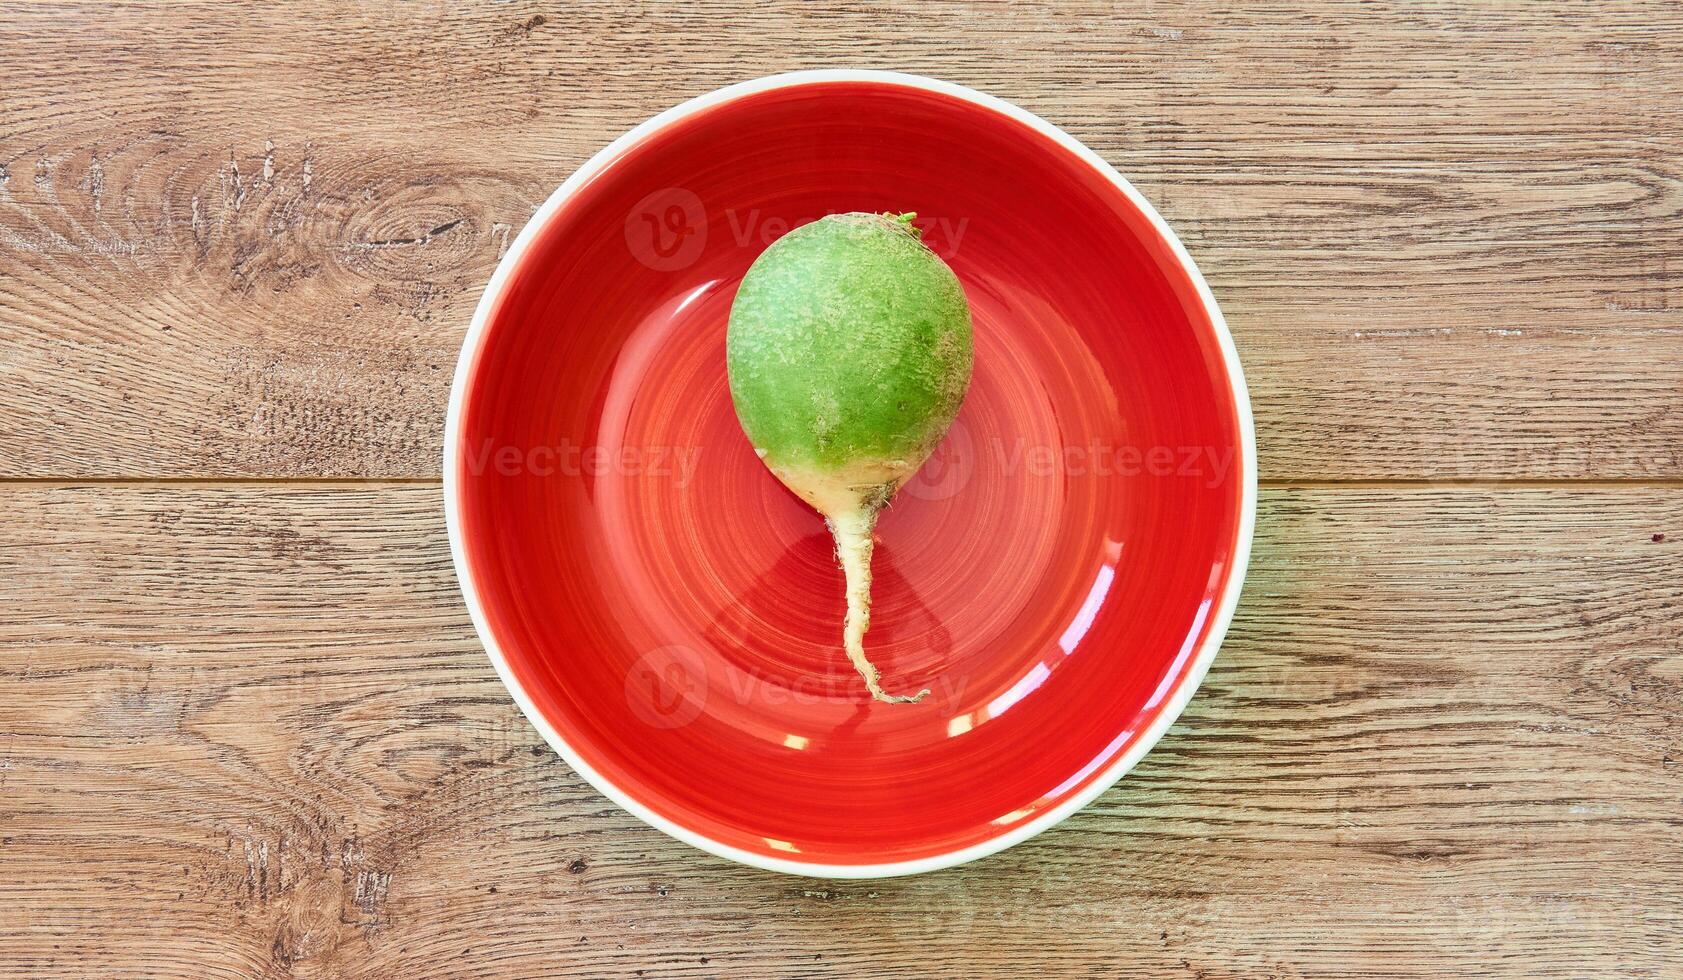 big green radish on a red plate on a wooden tabletop photo